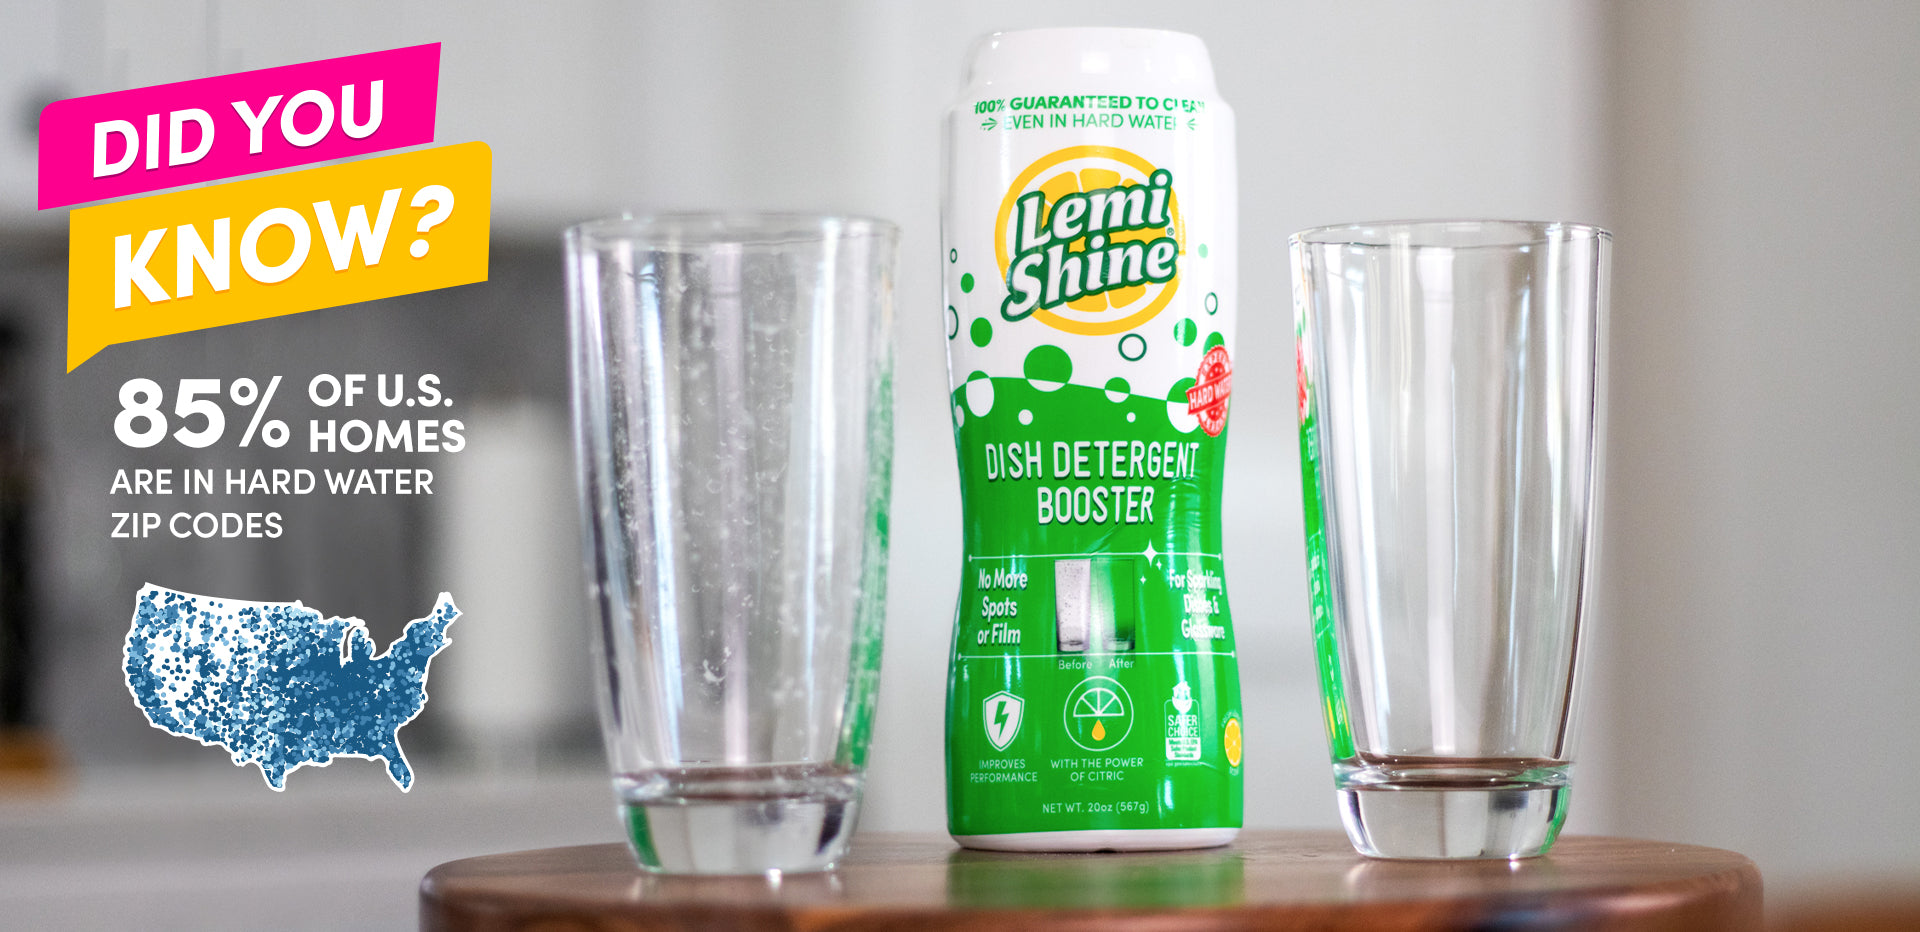 Lemi Shine  Safer cleaning products using powerful citrus extracts